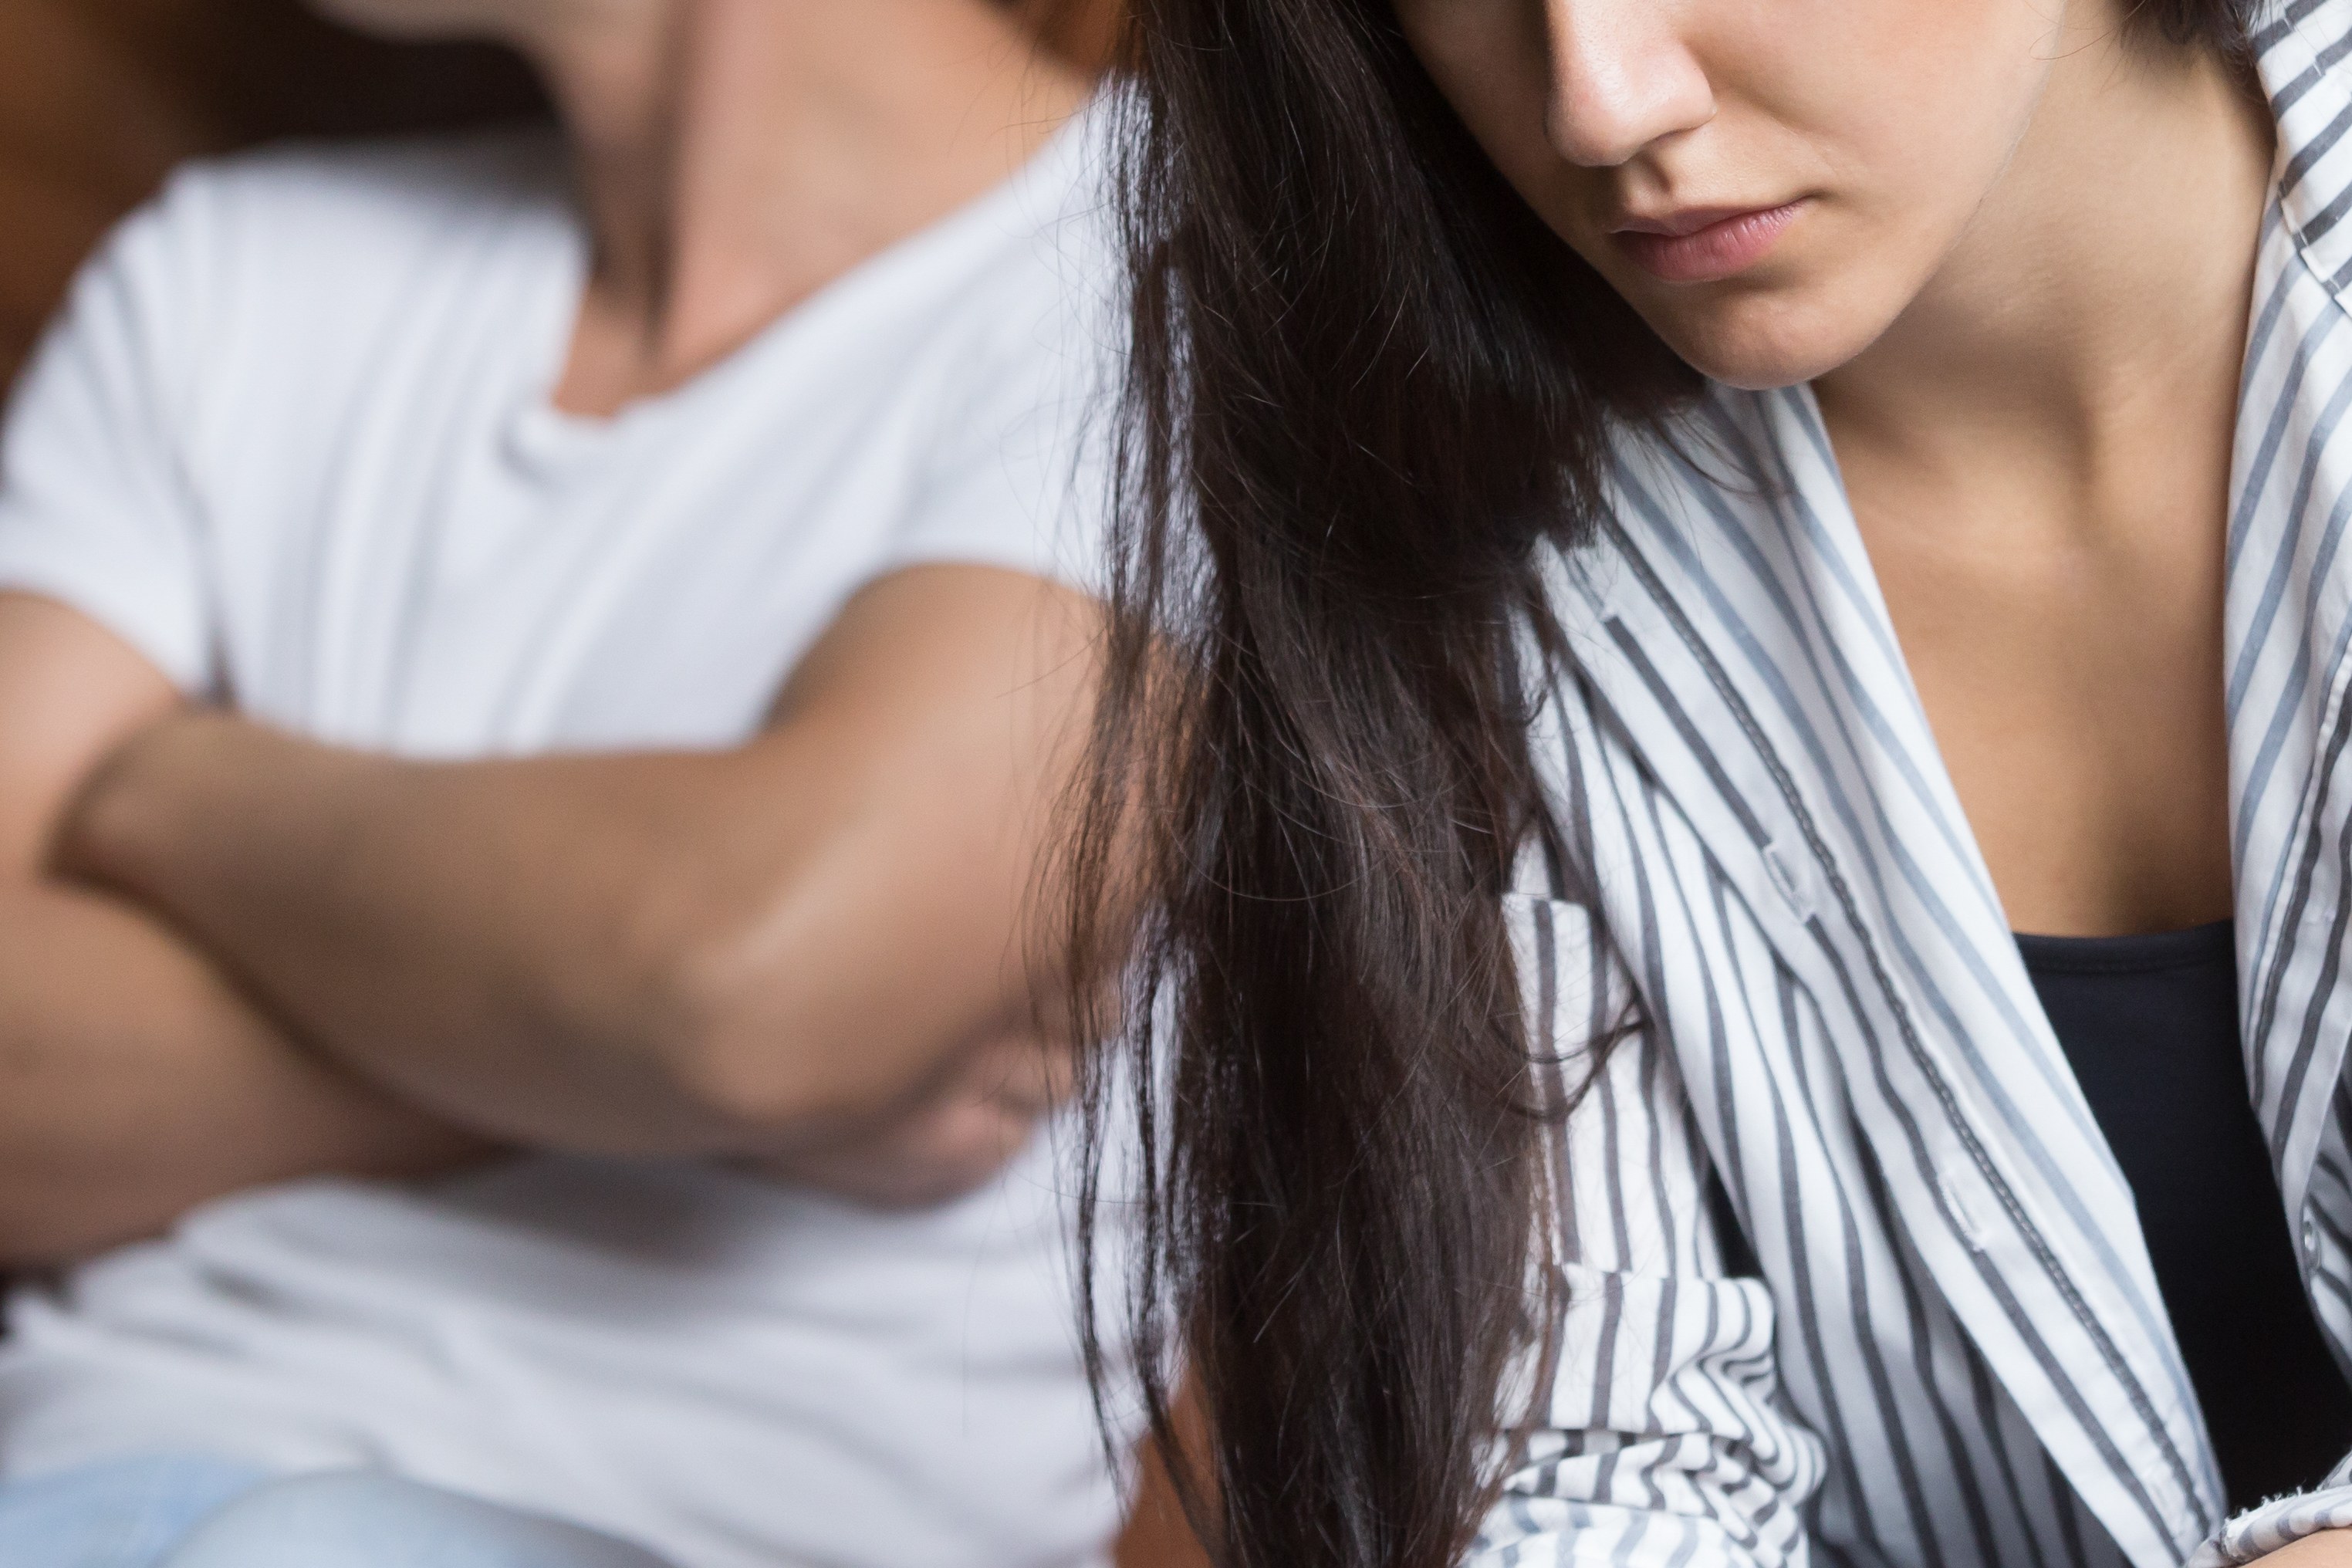 Abusive Relationship warning signs indication red flags abuse domestic violence